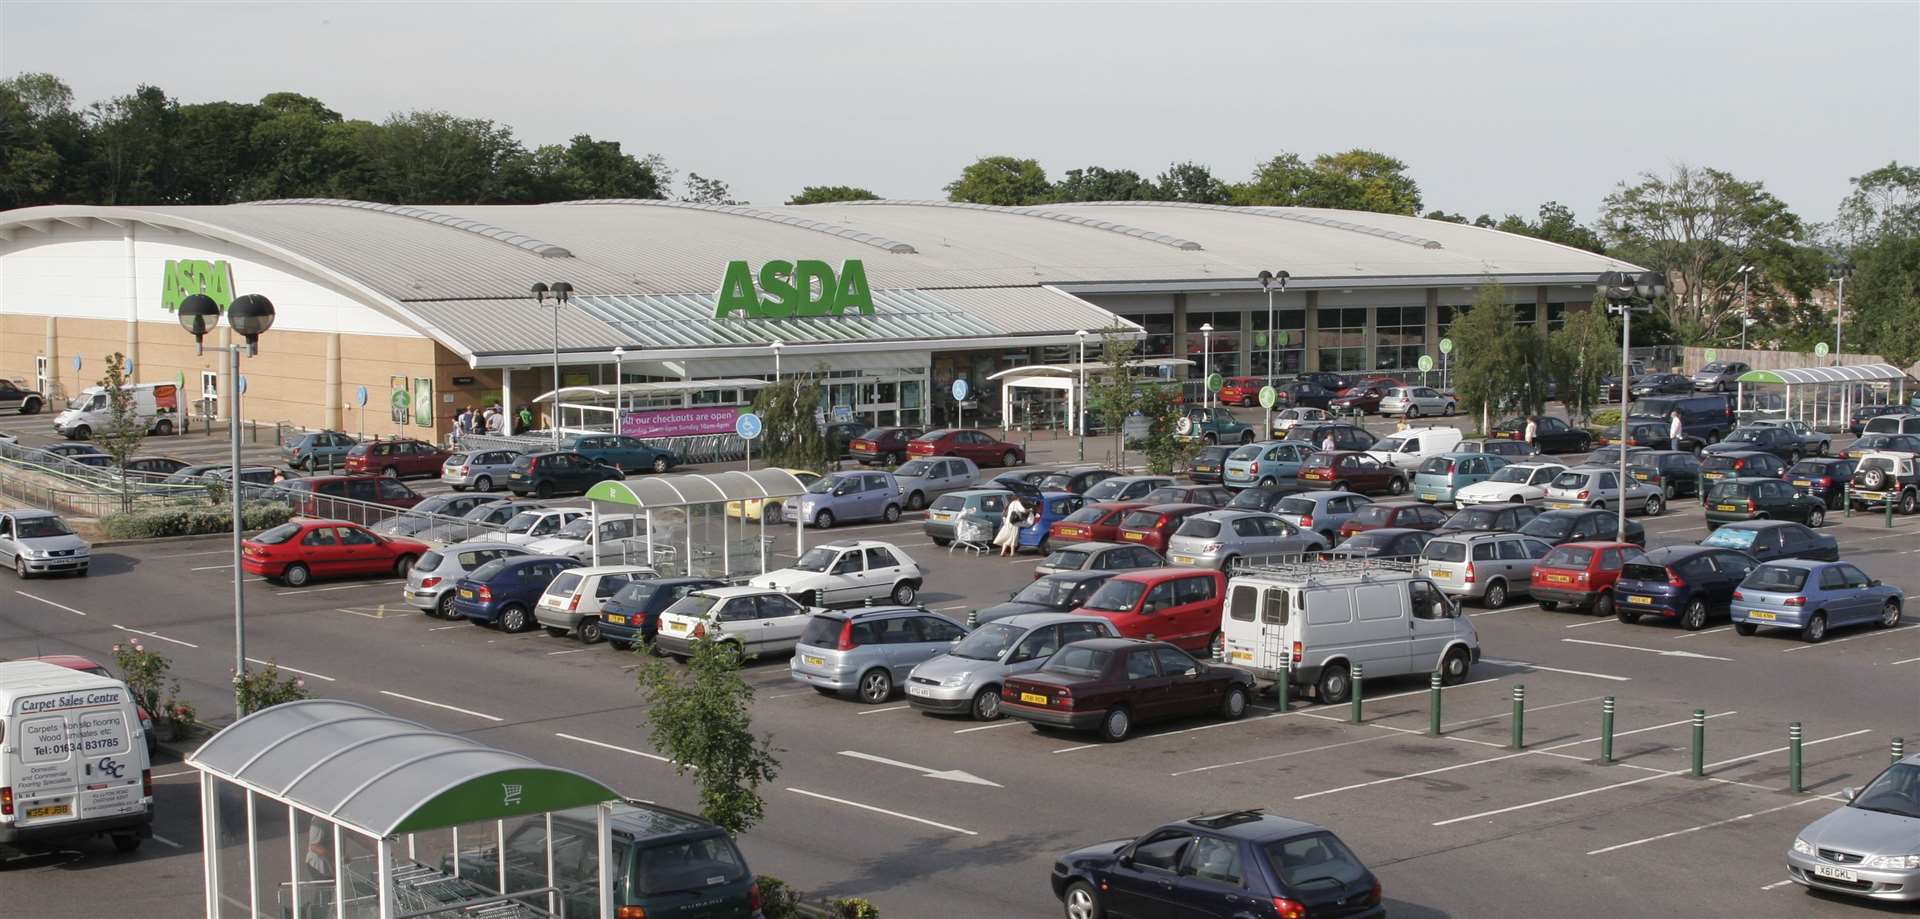 Asda in Chatham, where Liam Chapman is alleged to have stolen alcohol from Picture by Peter Still